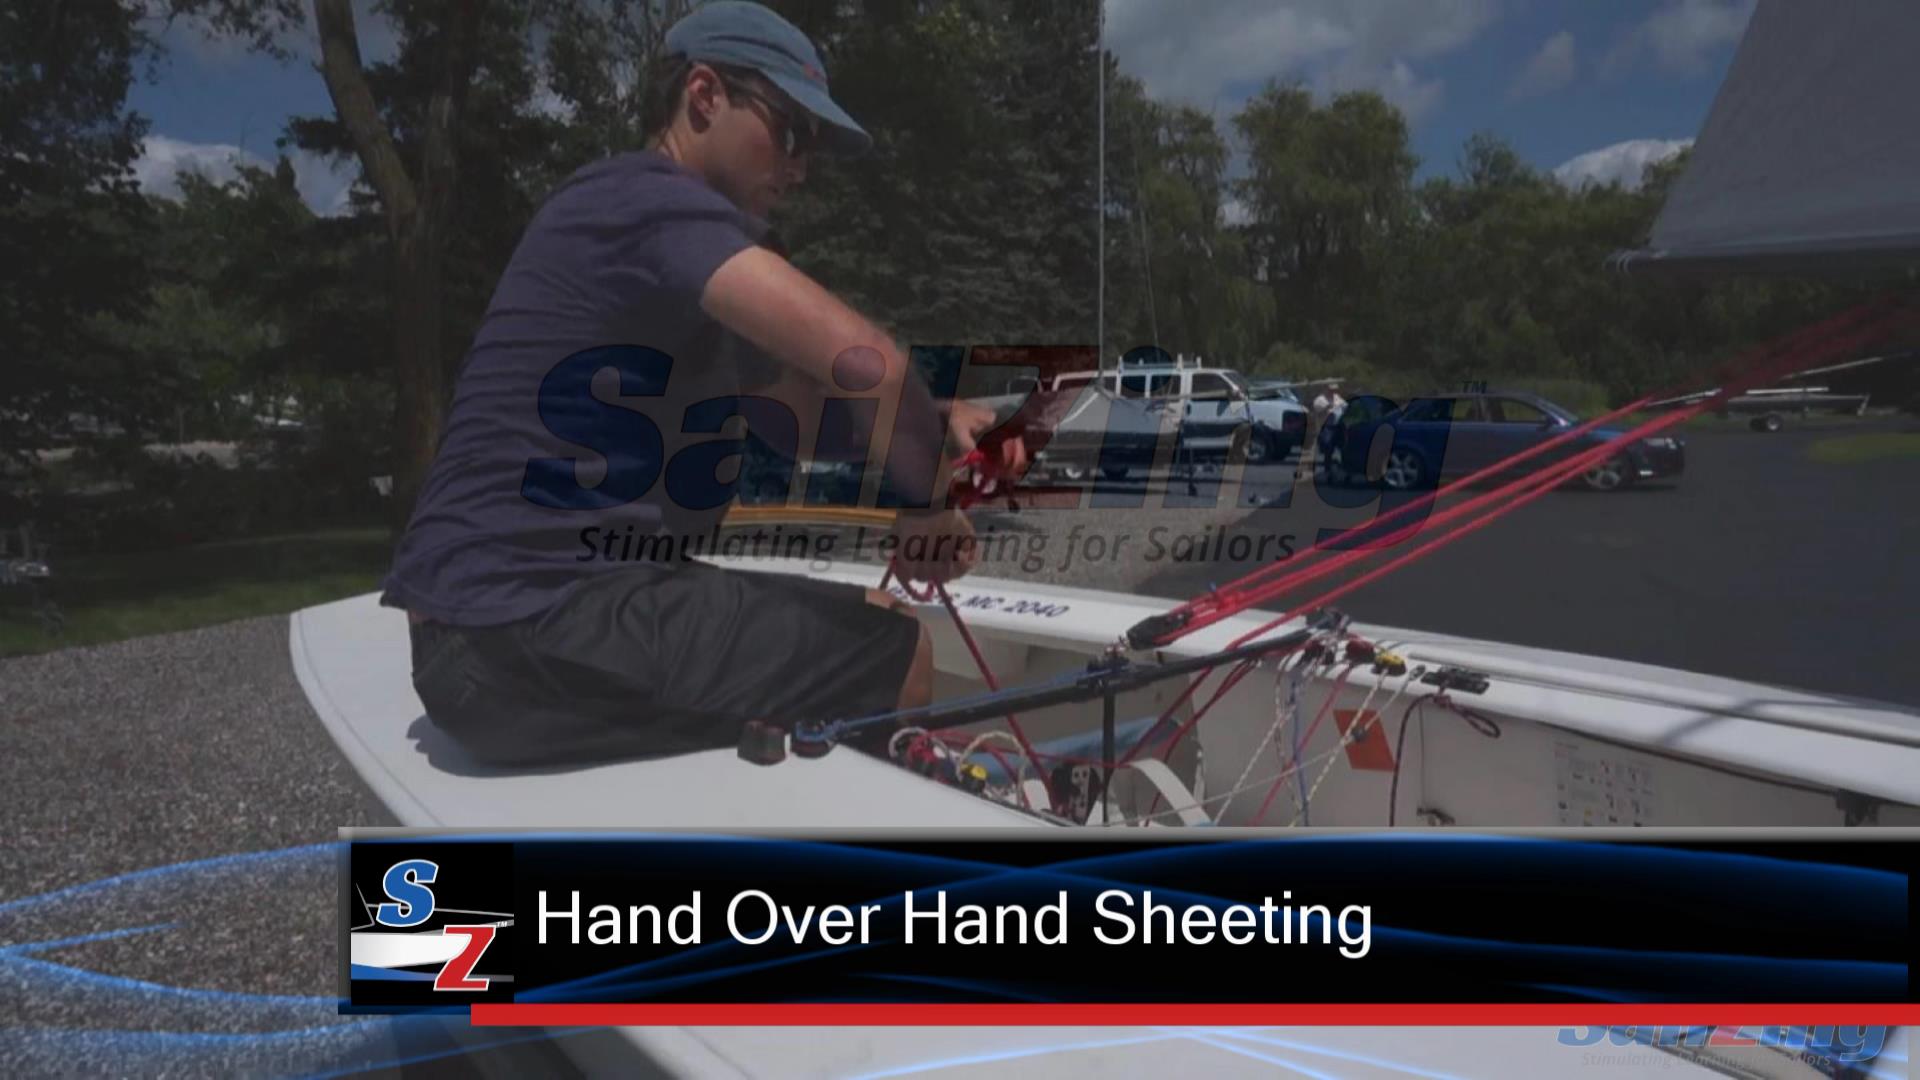 Hand Over Hand Sheeting – A “Must Have” Skill